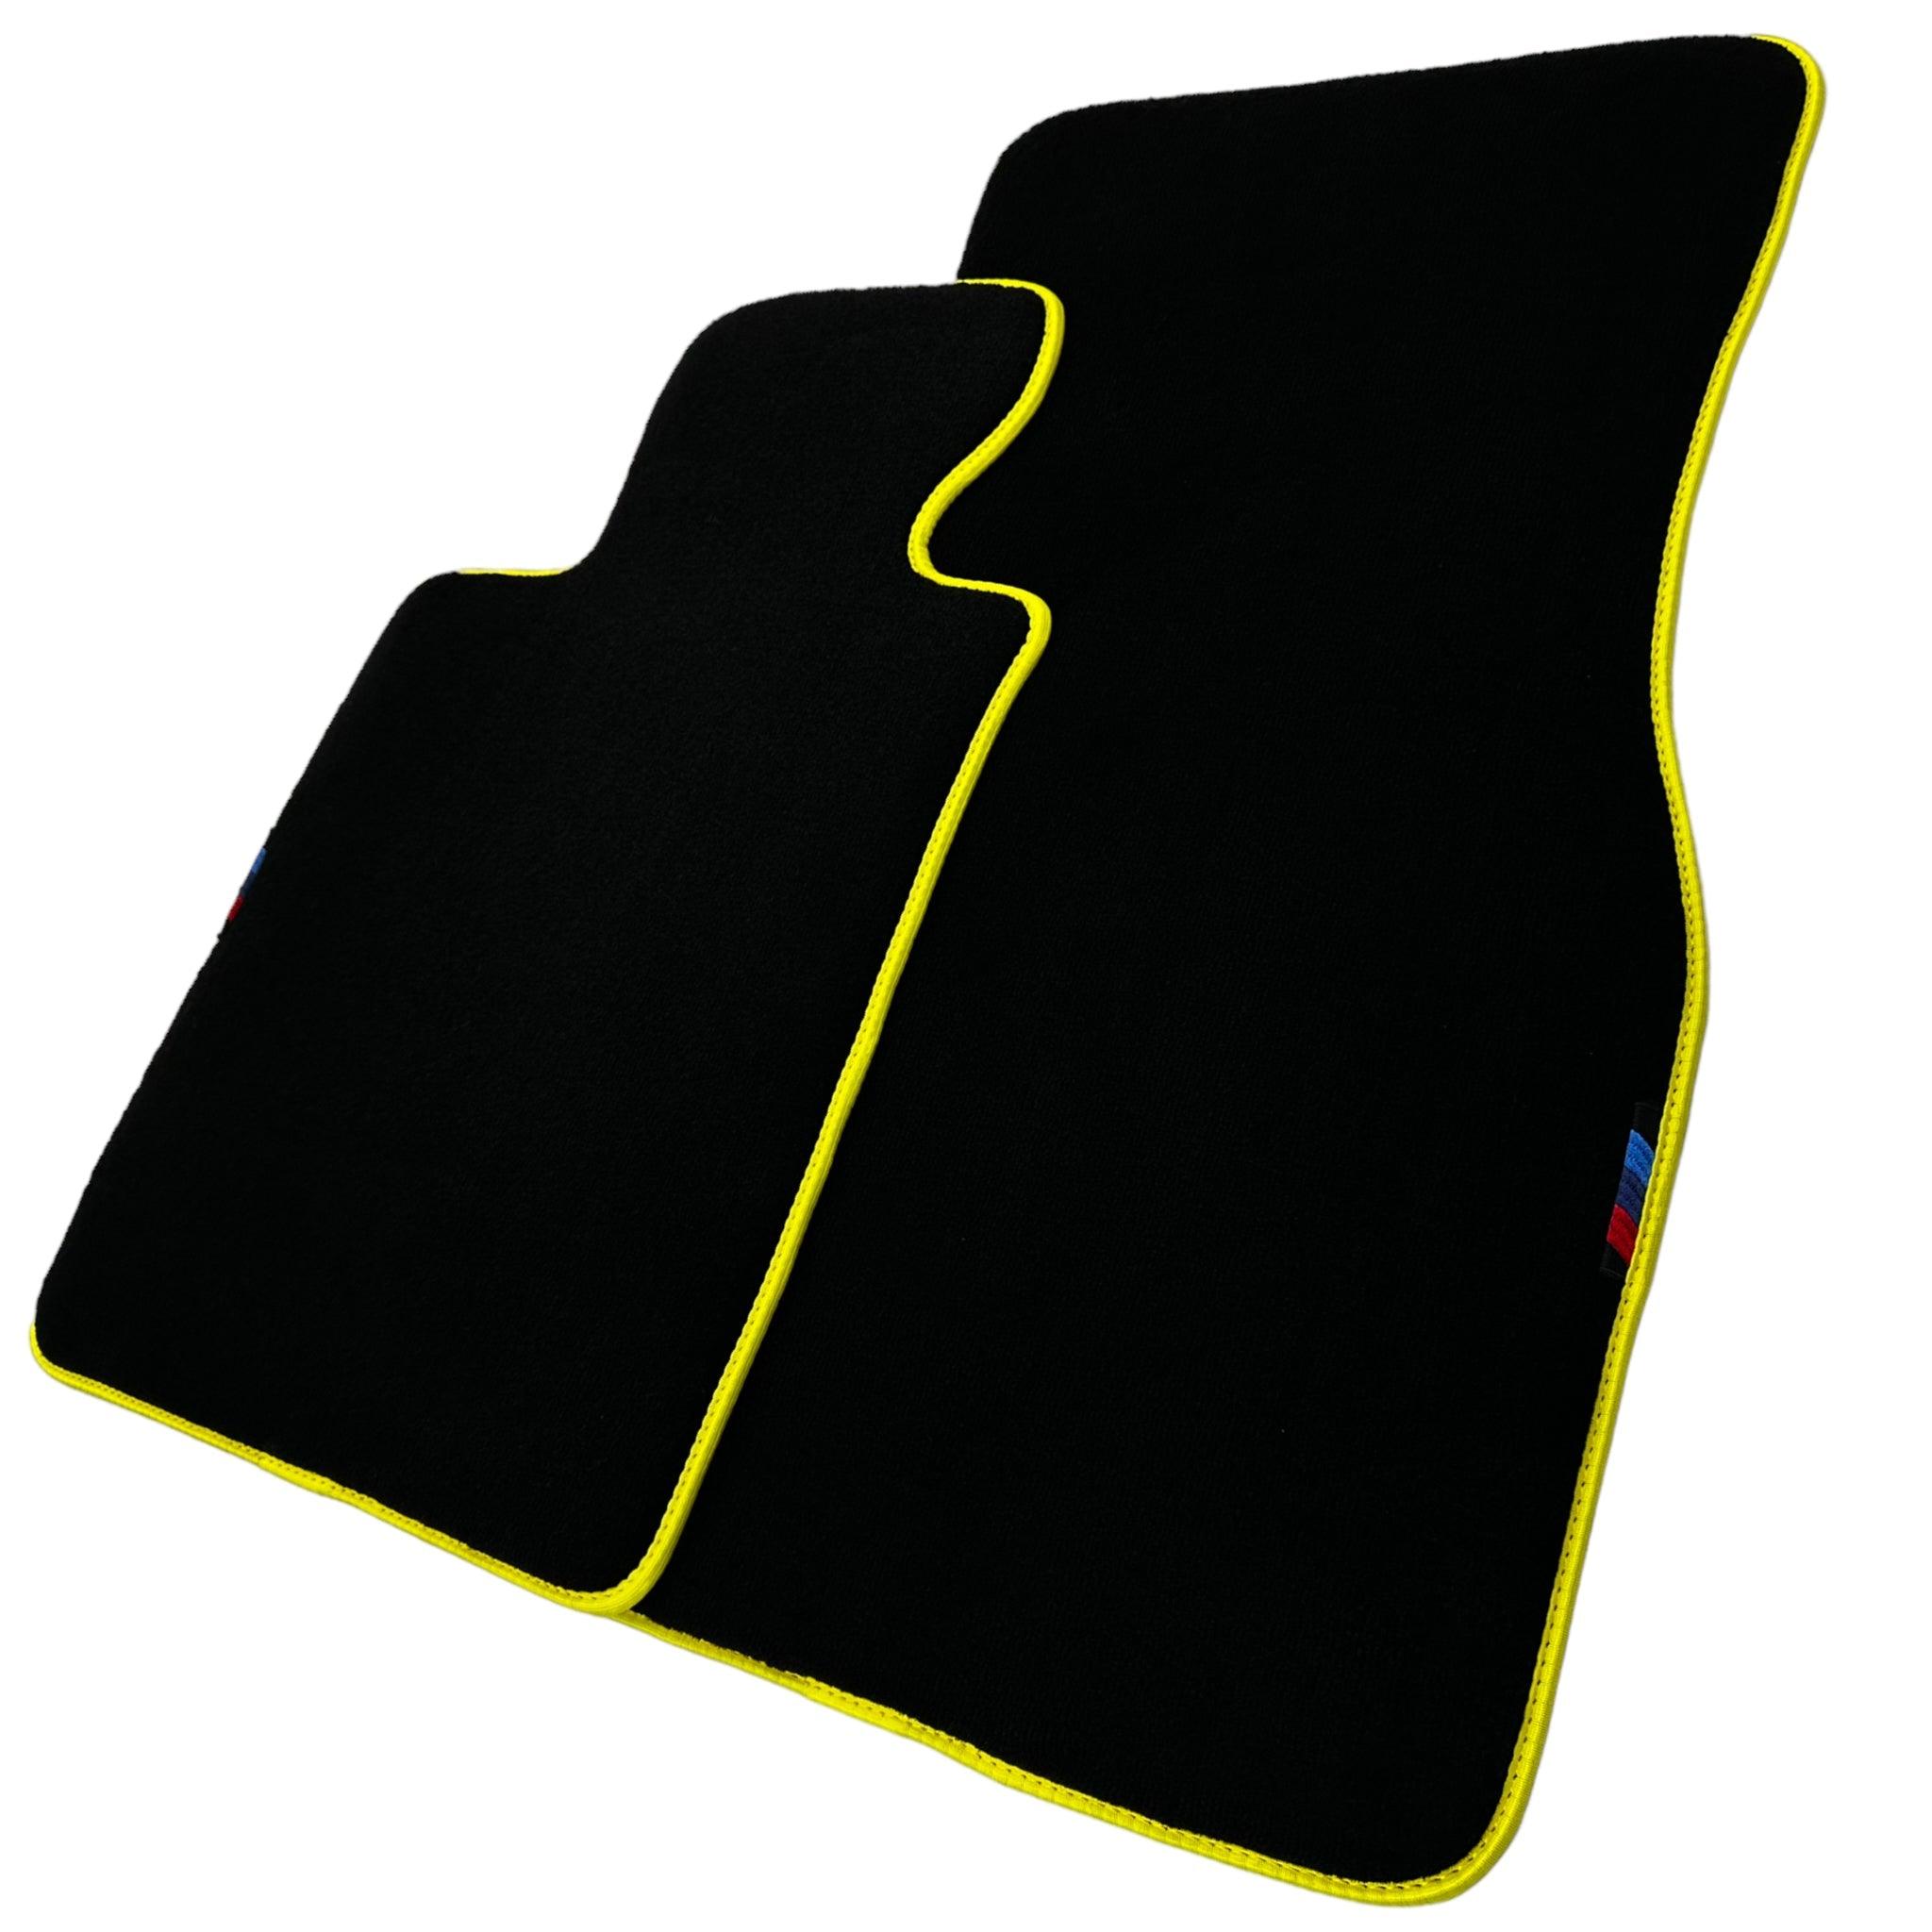 Black Floor Mats For BMW 3 Series E36 2-door Coupe | Fighter Jet Edition | Yellow Trim